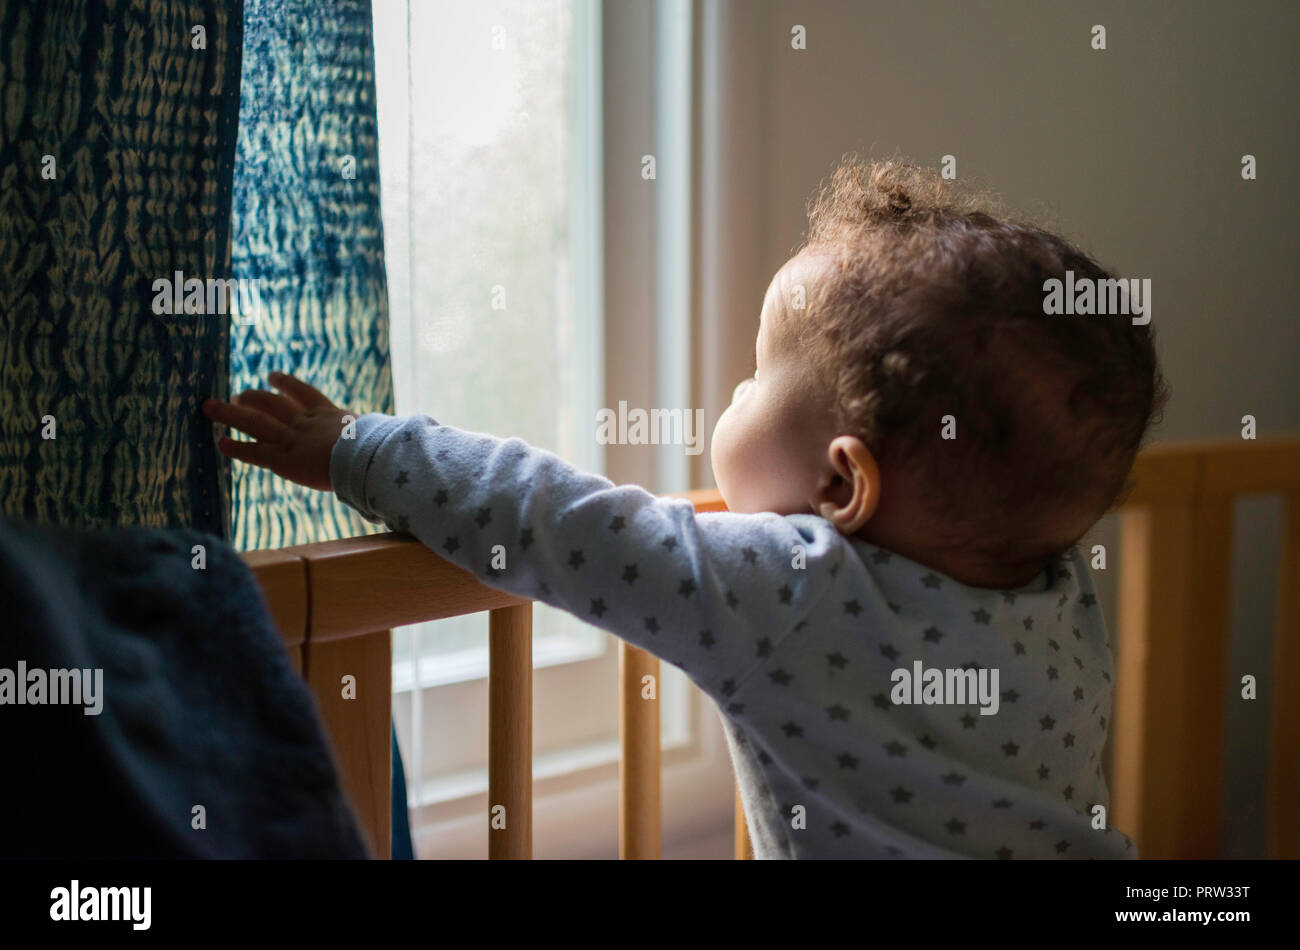 Baby boy standing up in crib looking out through window Stock Photo